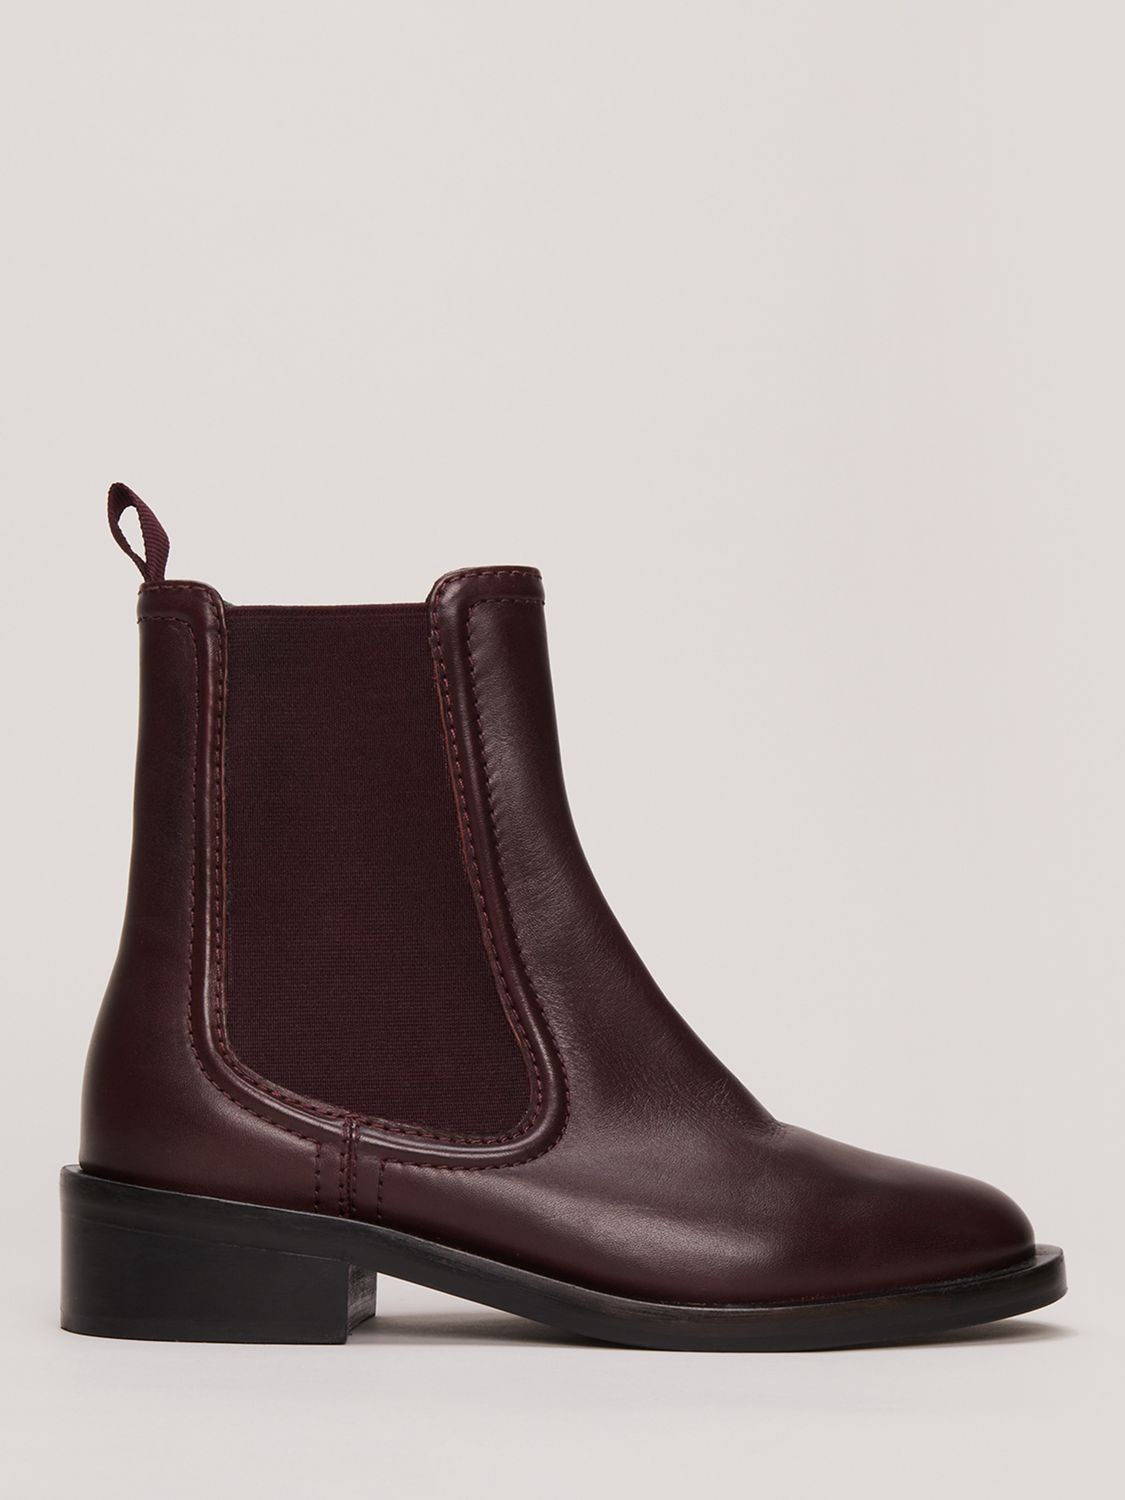 Phase Eight Leather Chelsea Boots, Burgundy at John Lewis & Partners